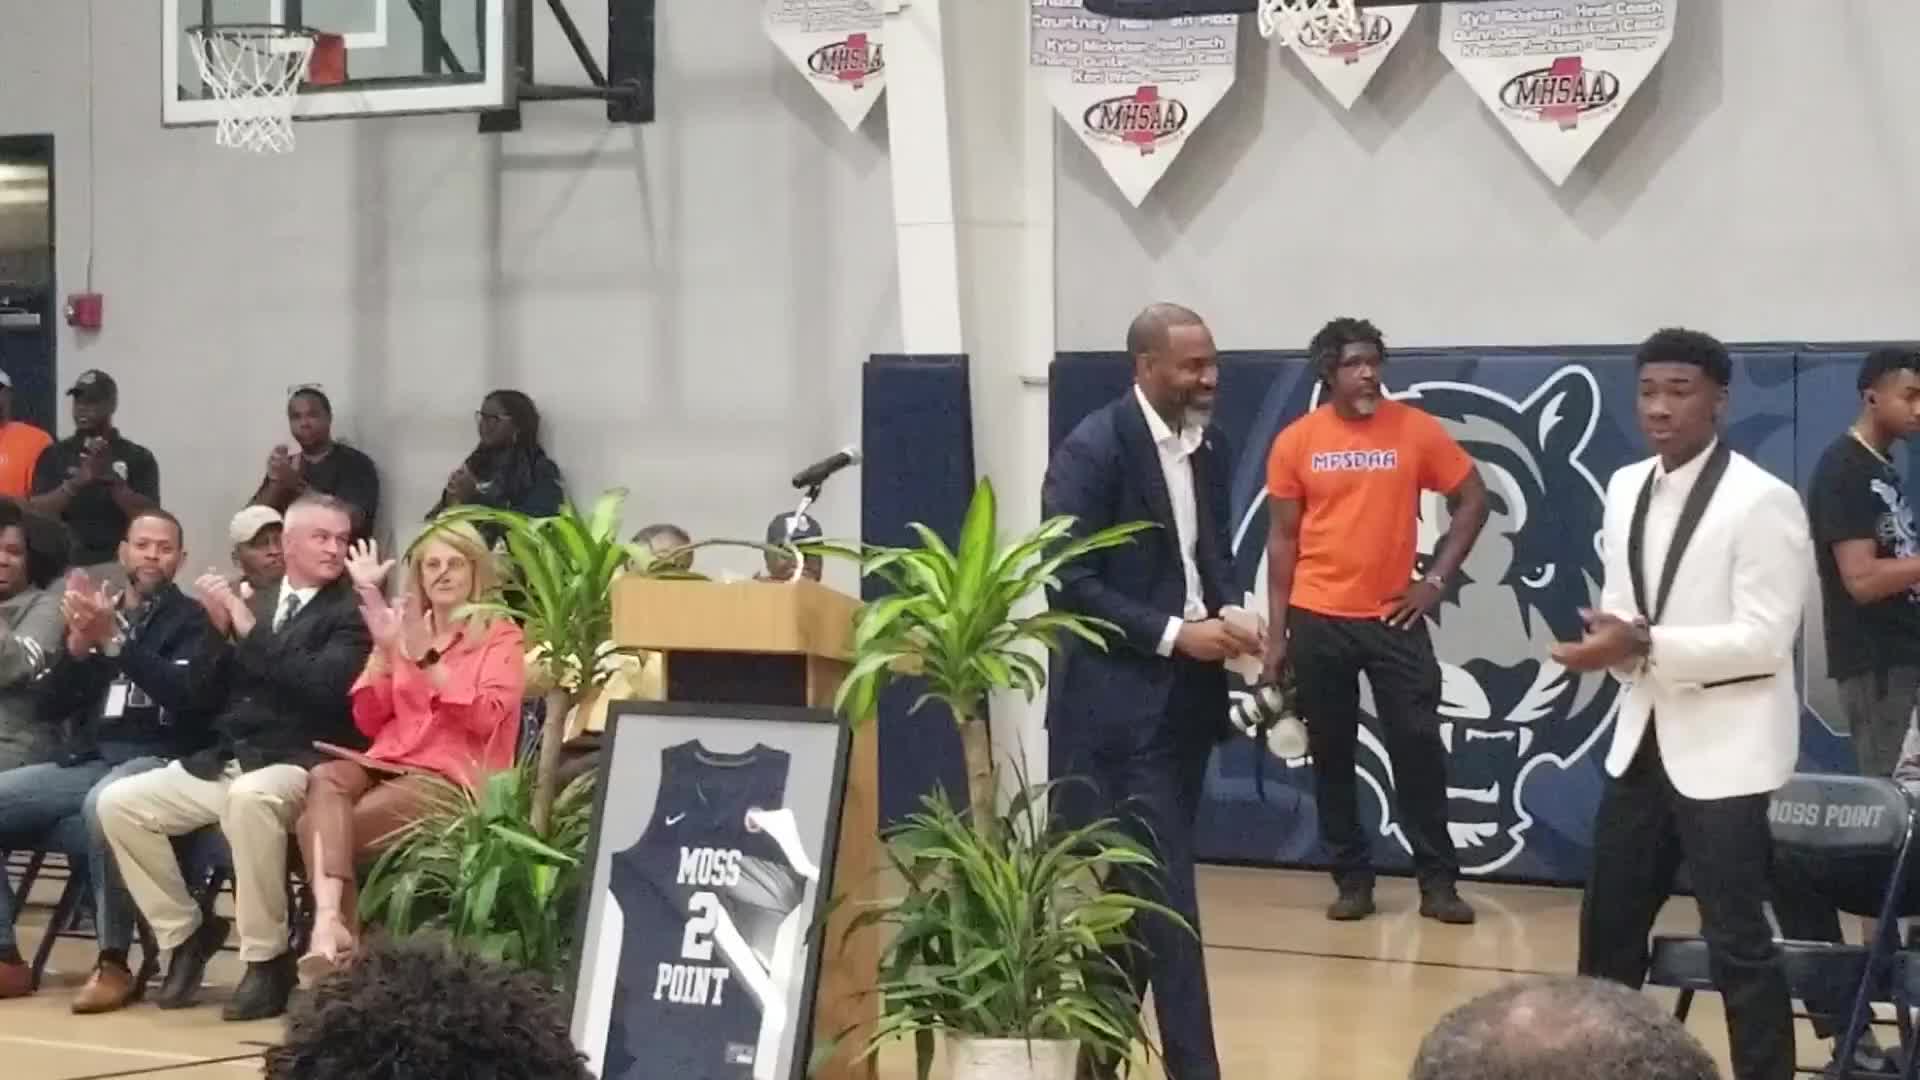 NBA star Devin Booker's jersey retired at Moss Point high